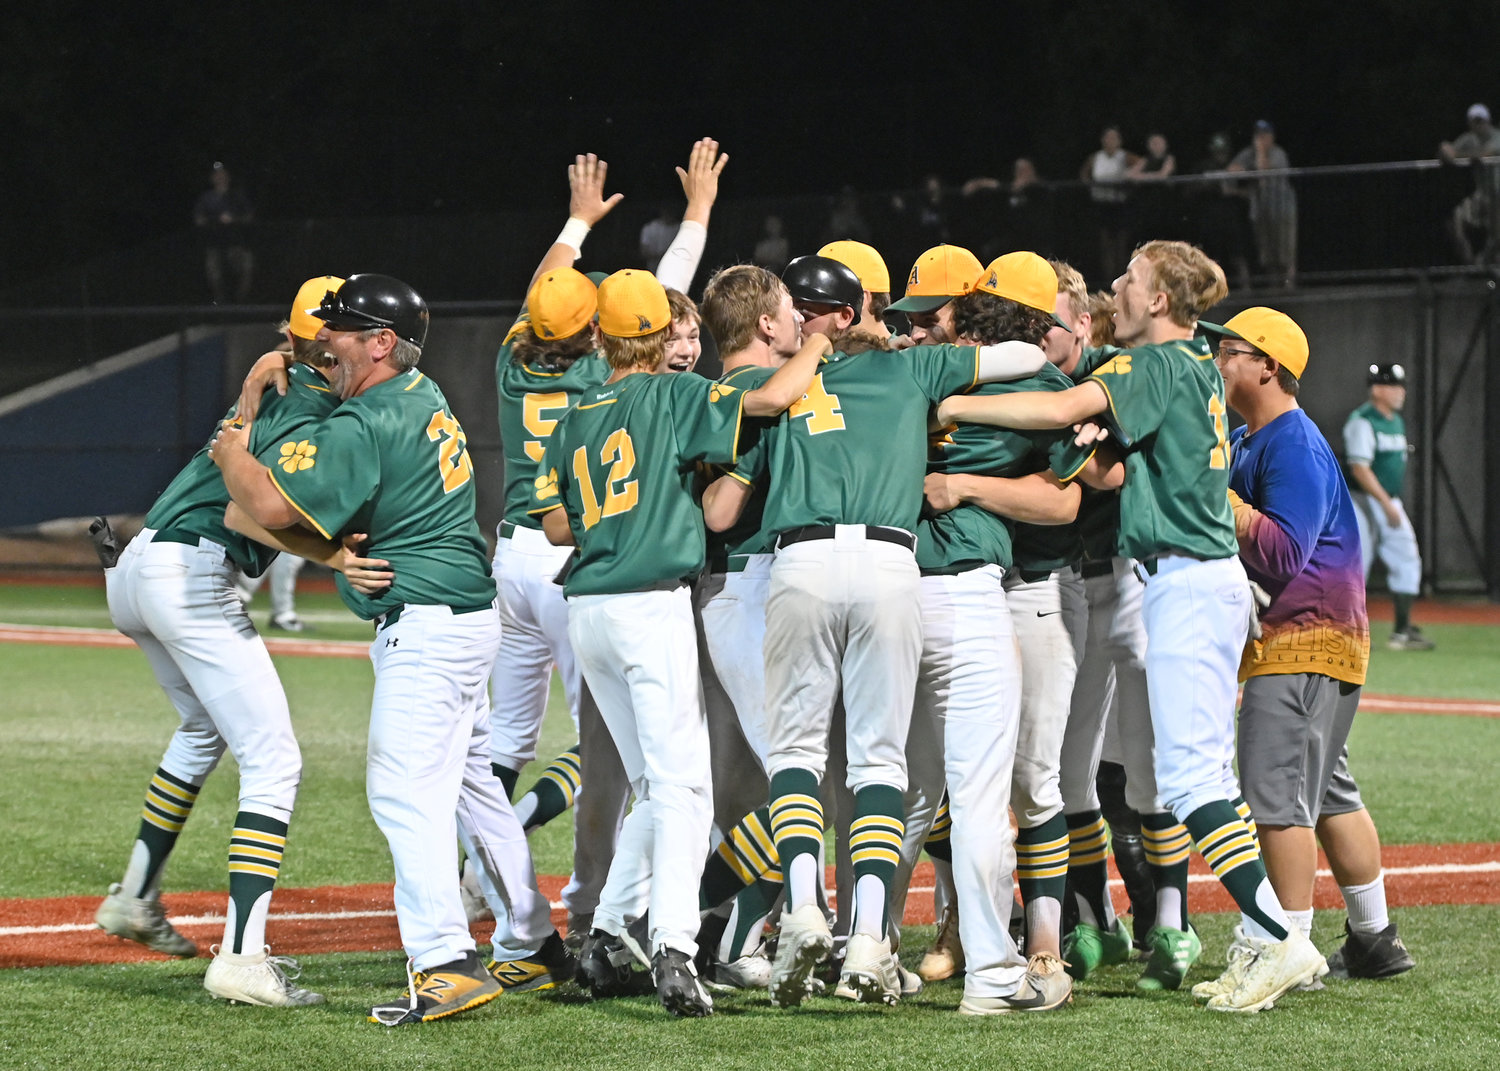 The Adirondack baseball celebrates the Section III Class C championship game win over Westmoreland Tuesday night at Onondaga Community College. The 11-seed Wildcats won 6-2 to upset the top-seeded Bulldogs, who were 19-0 going into the game, including two wins over Adirondack in the regular season.